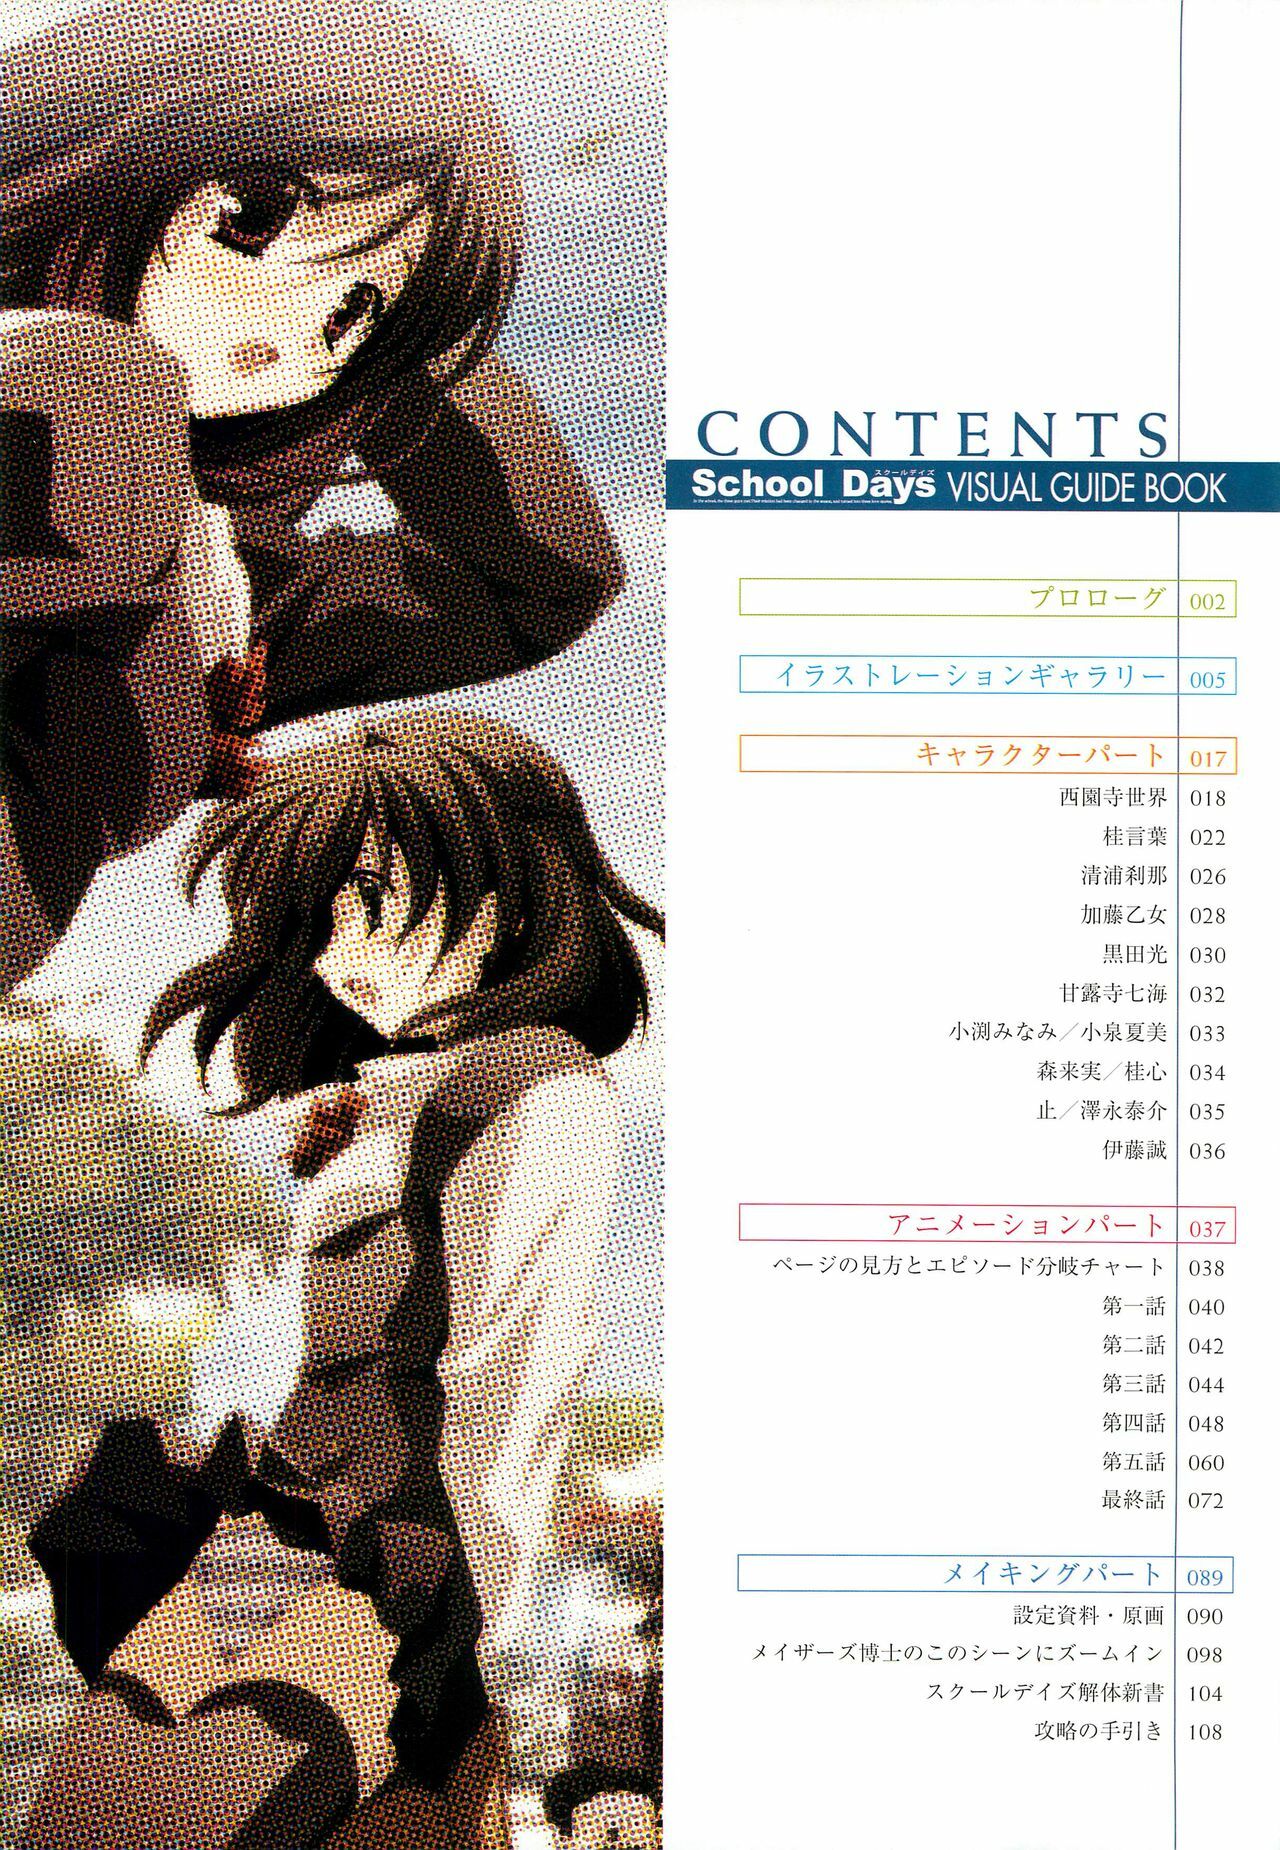 School Days Visual Guide Book page 6 full